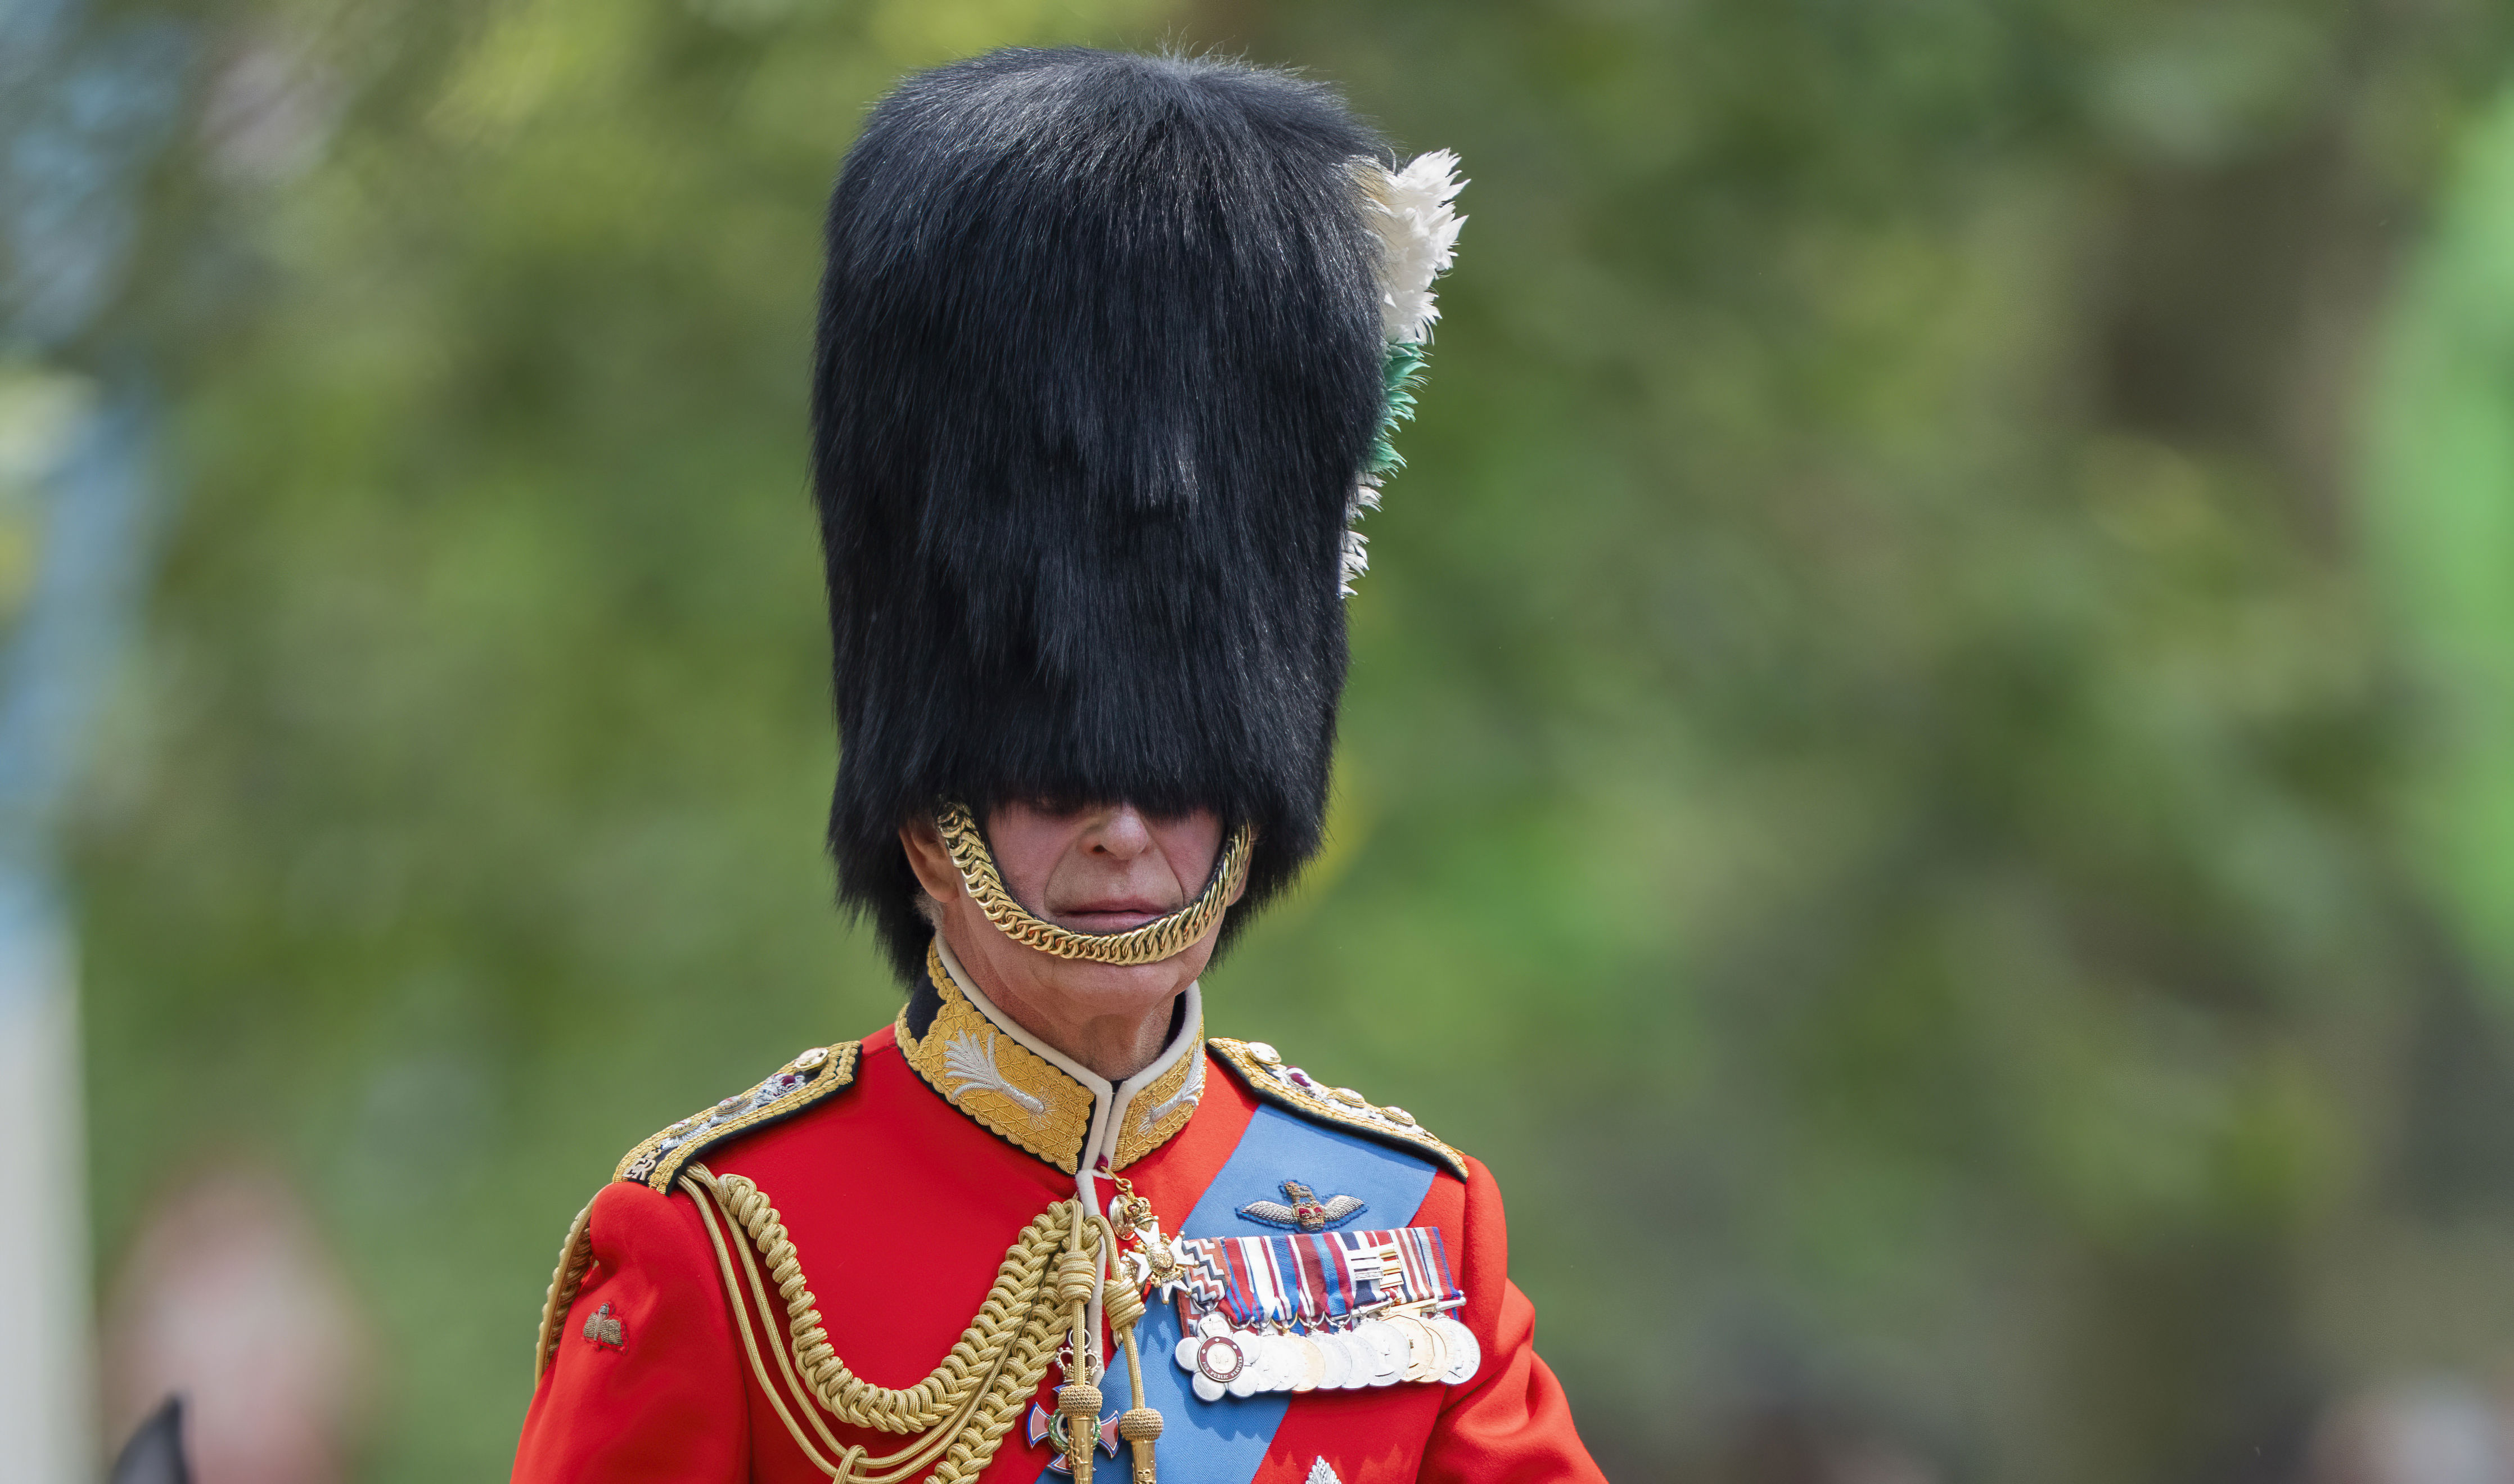 <p>King Charles III -- looking an awful lot like his late father, Prince Philip -- rode down The Mall in London on horseback during his <a href="https://www.wonderwall.com/celebrity/royals/trooping-the-colour-2023-king-charles-iii-celebrates-the-first-of-his-reign-752078.gallery">Trooping the Colour</a> birthday parade on June 17, 2023.</p>